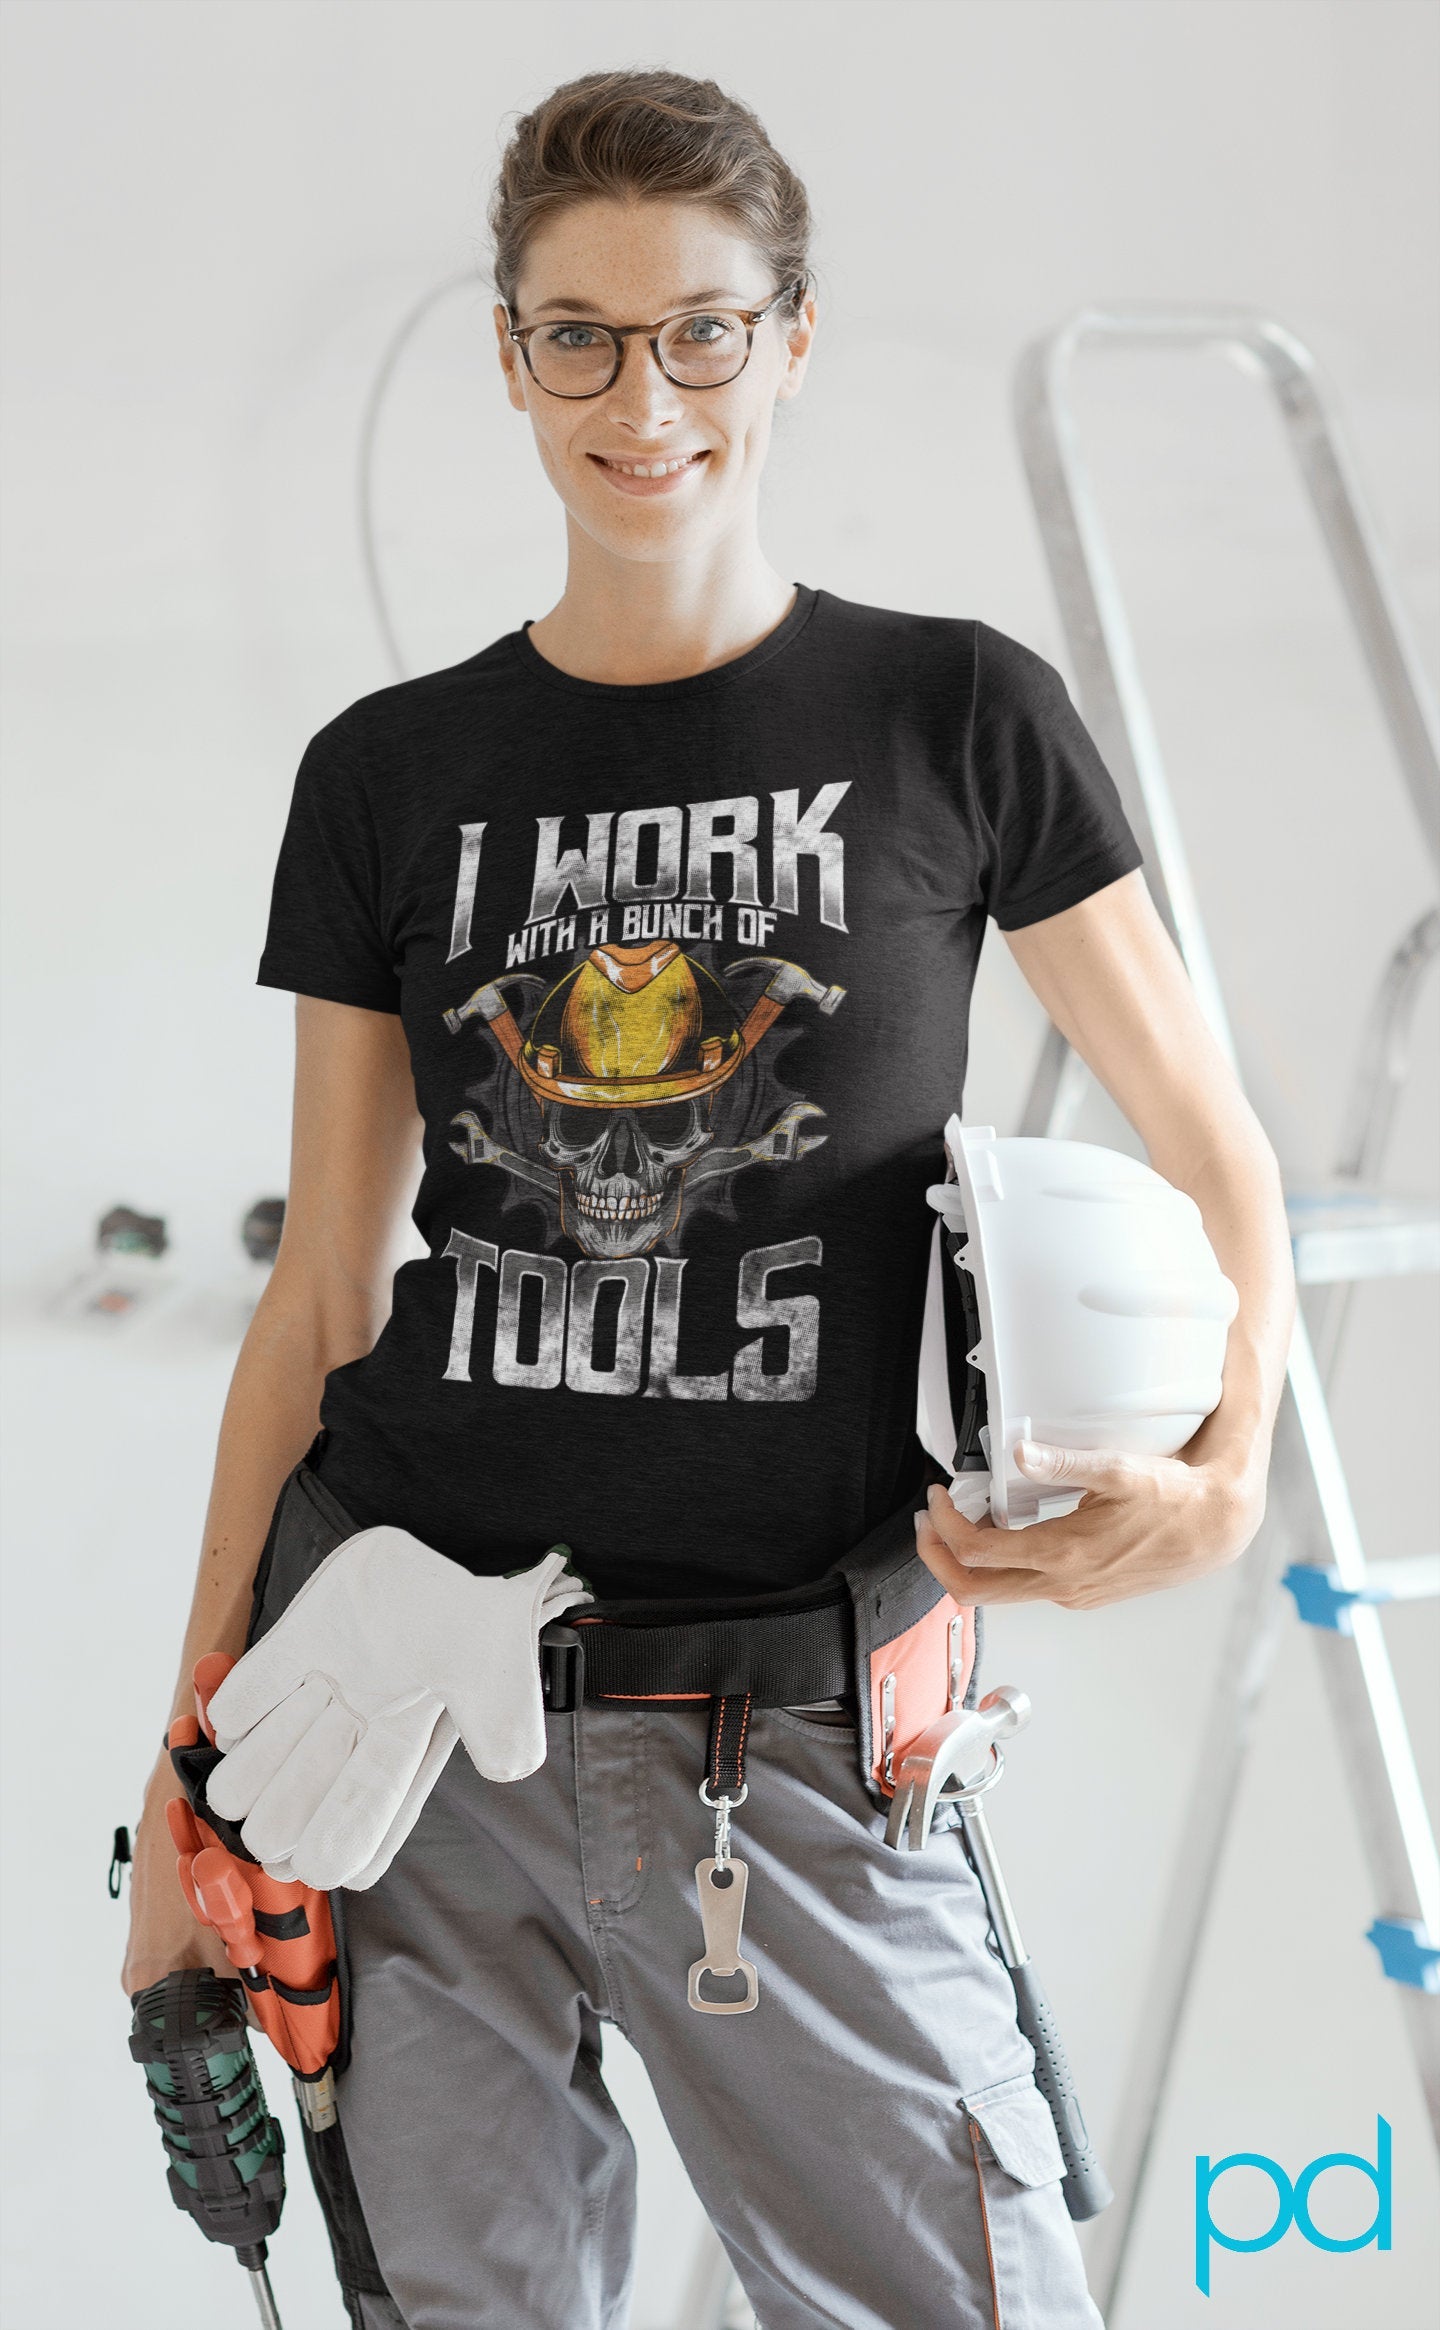 Funny Carpenter T-Shirt, I Work With A Bunch Of Tools Pun Gift Idea, Humorous Manual Worker Woodwork Graphic Tee Top